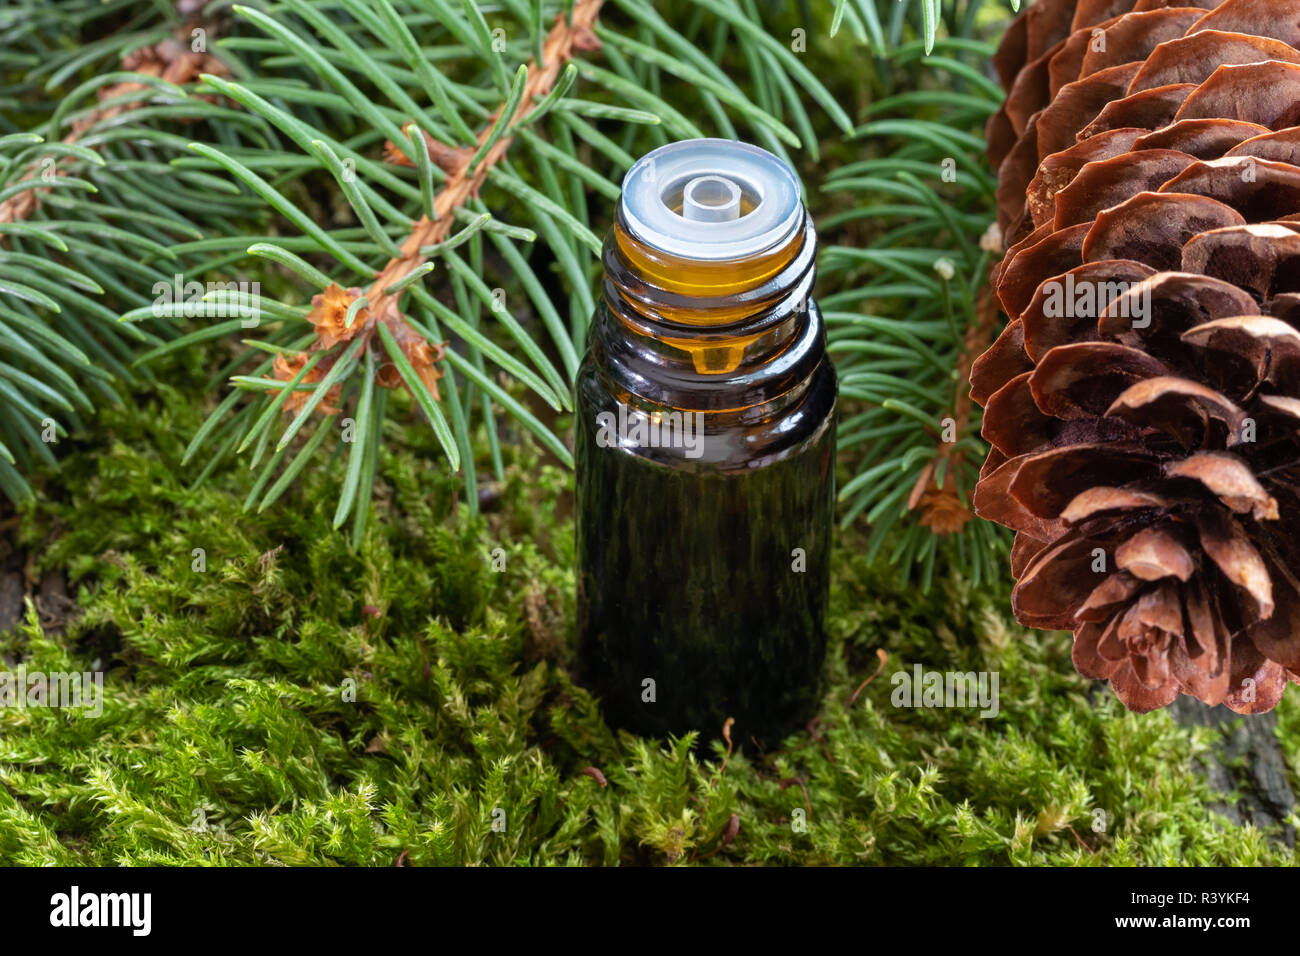 A bottle of essential oil on moss with fresh spruce branches and cones Stock Photo